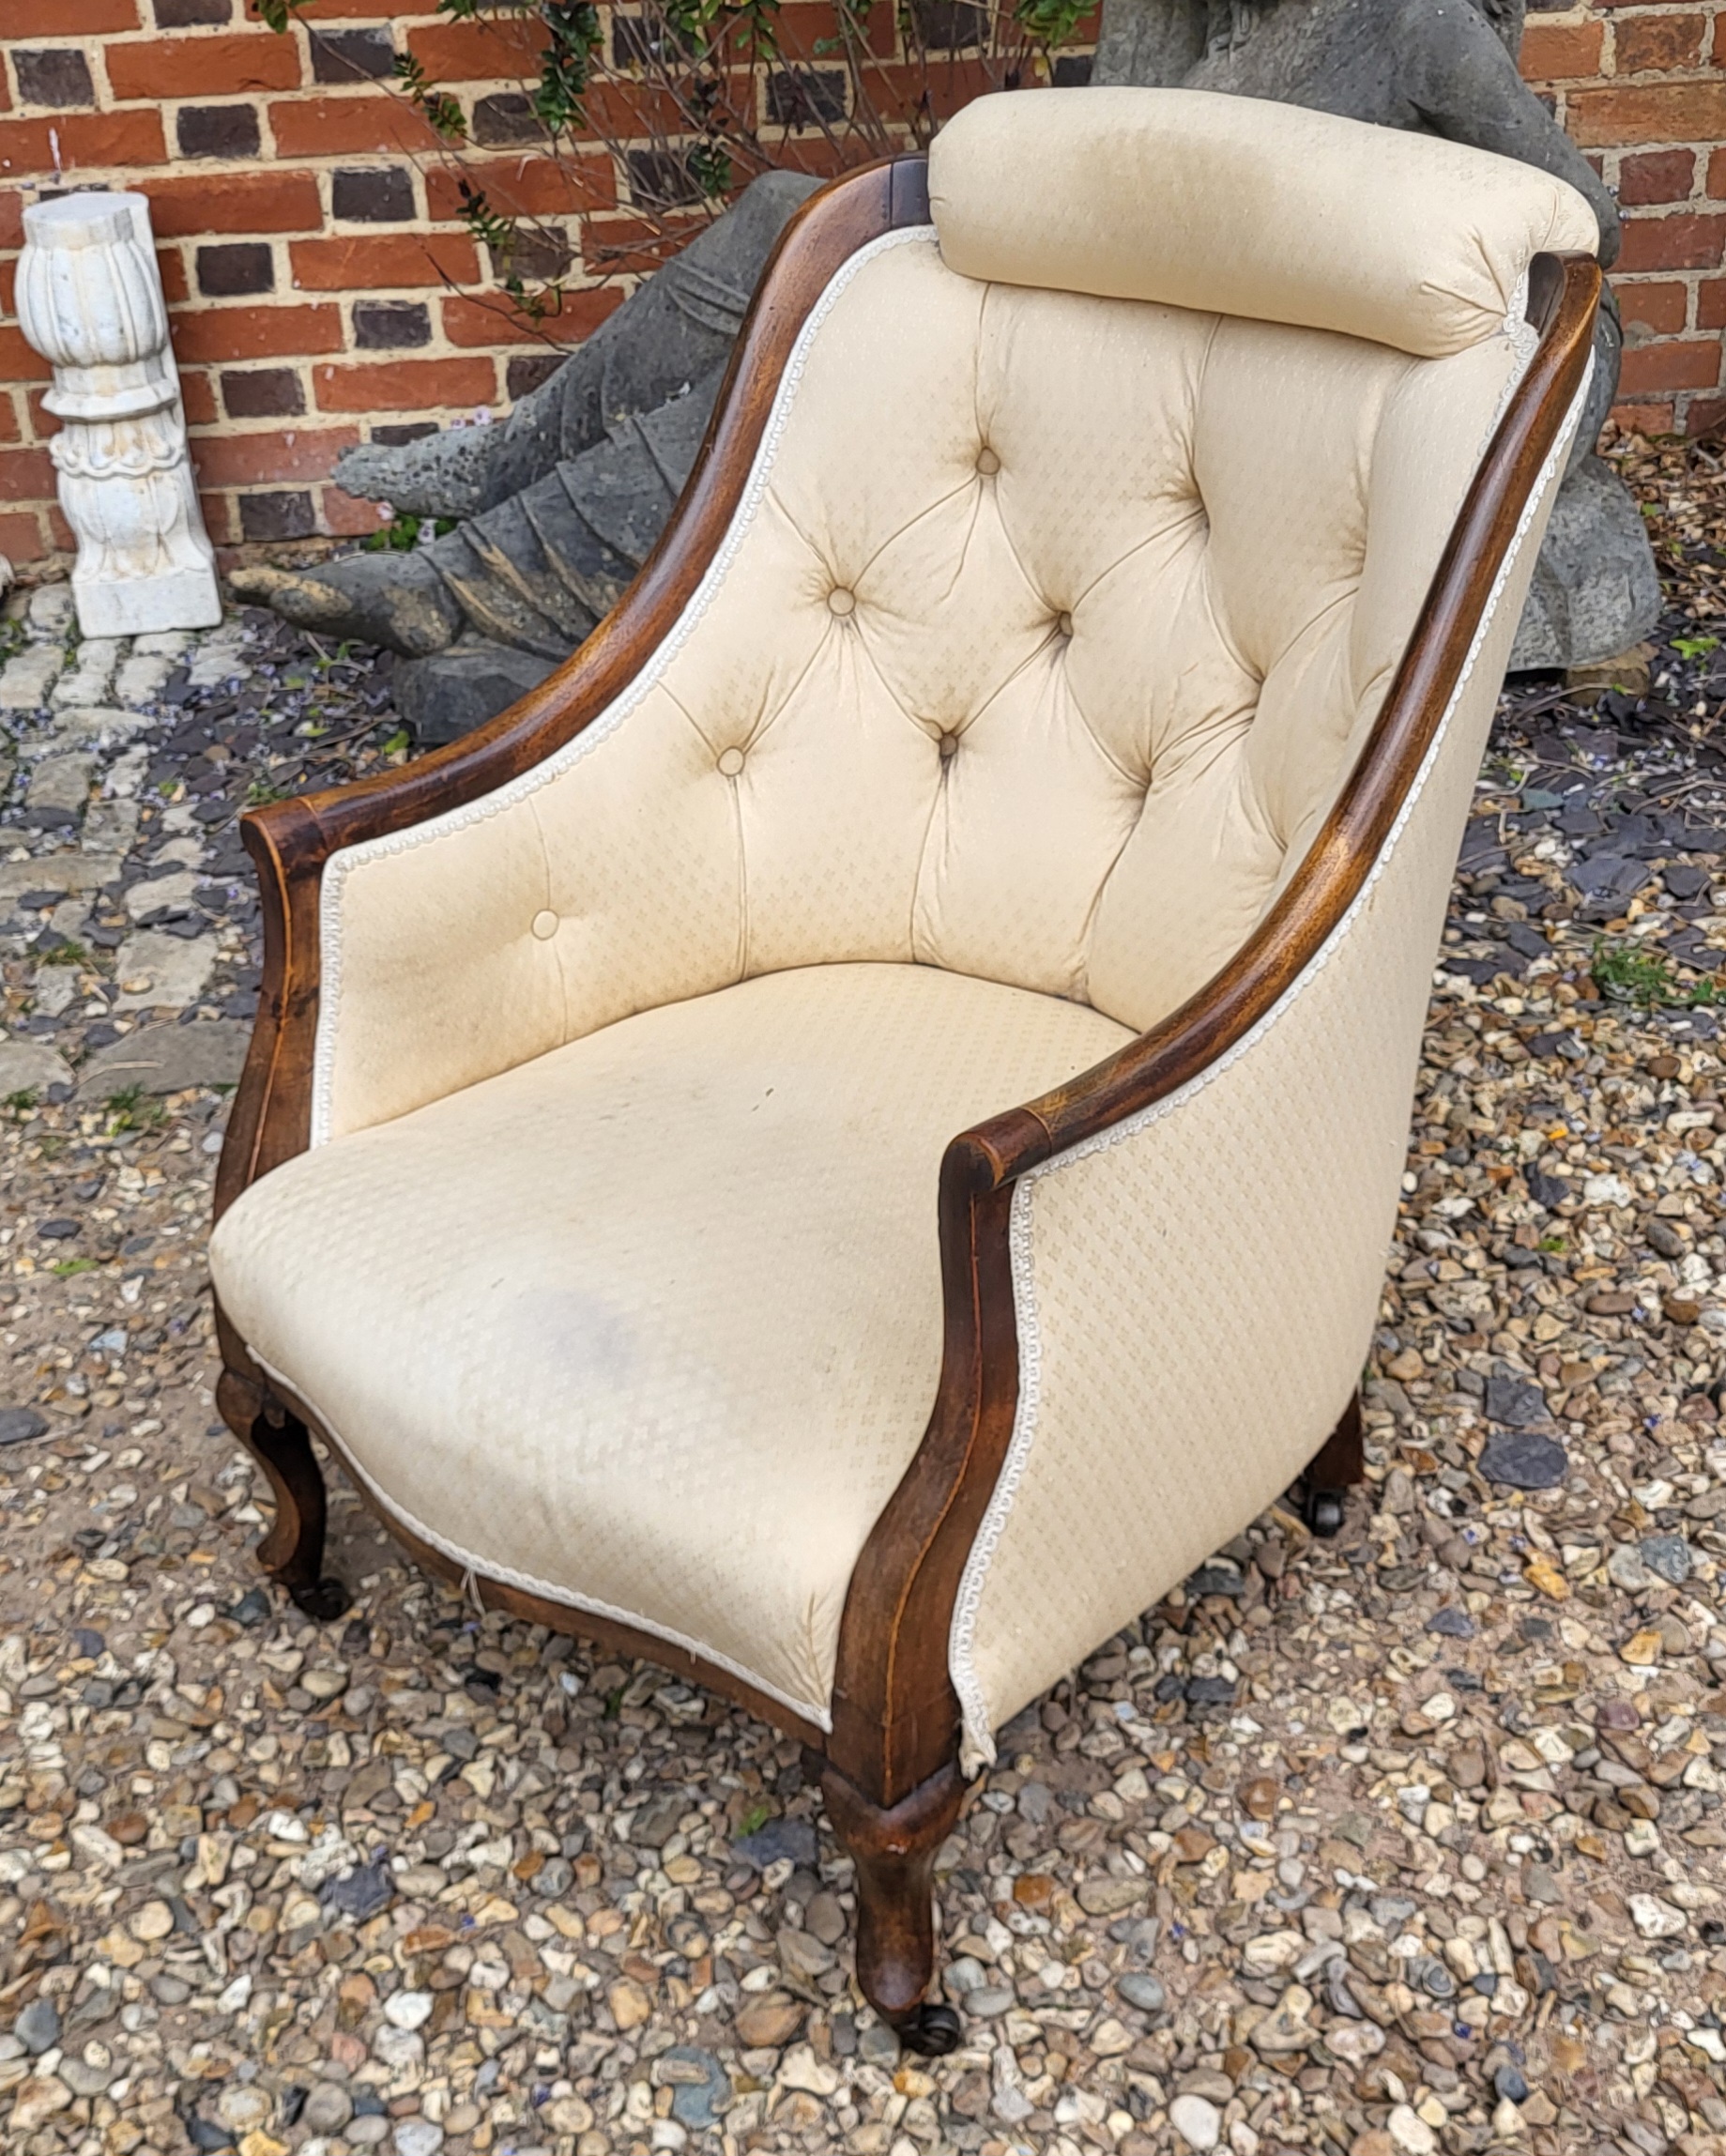 A VICTORIAN MAHOGANY TUB NURSING ARMCHAIR With cushioned headrest and button back upholstery on